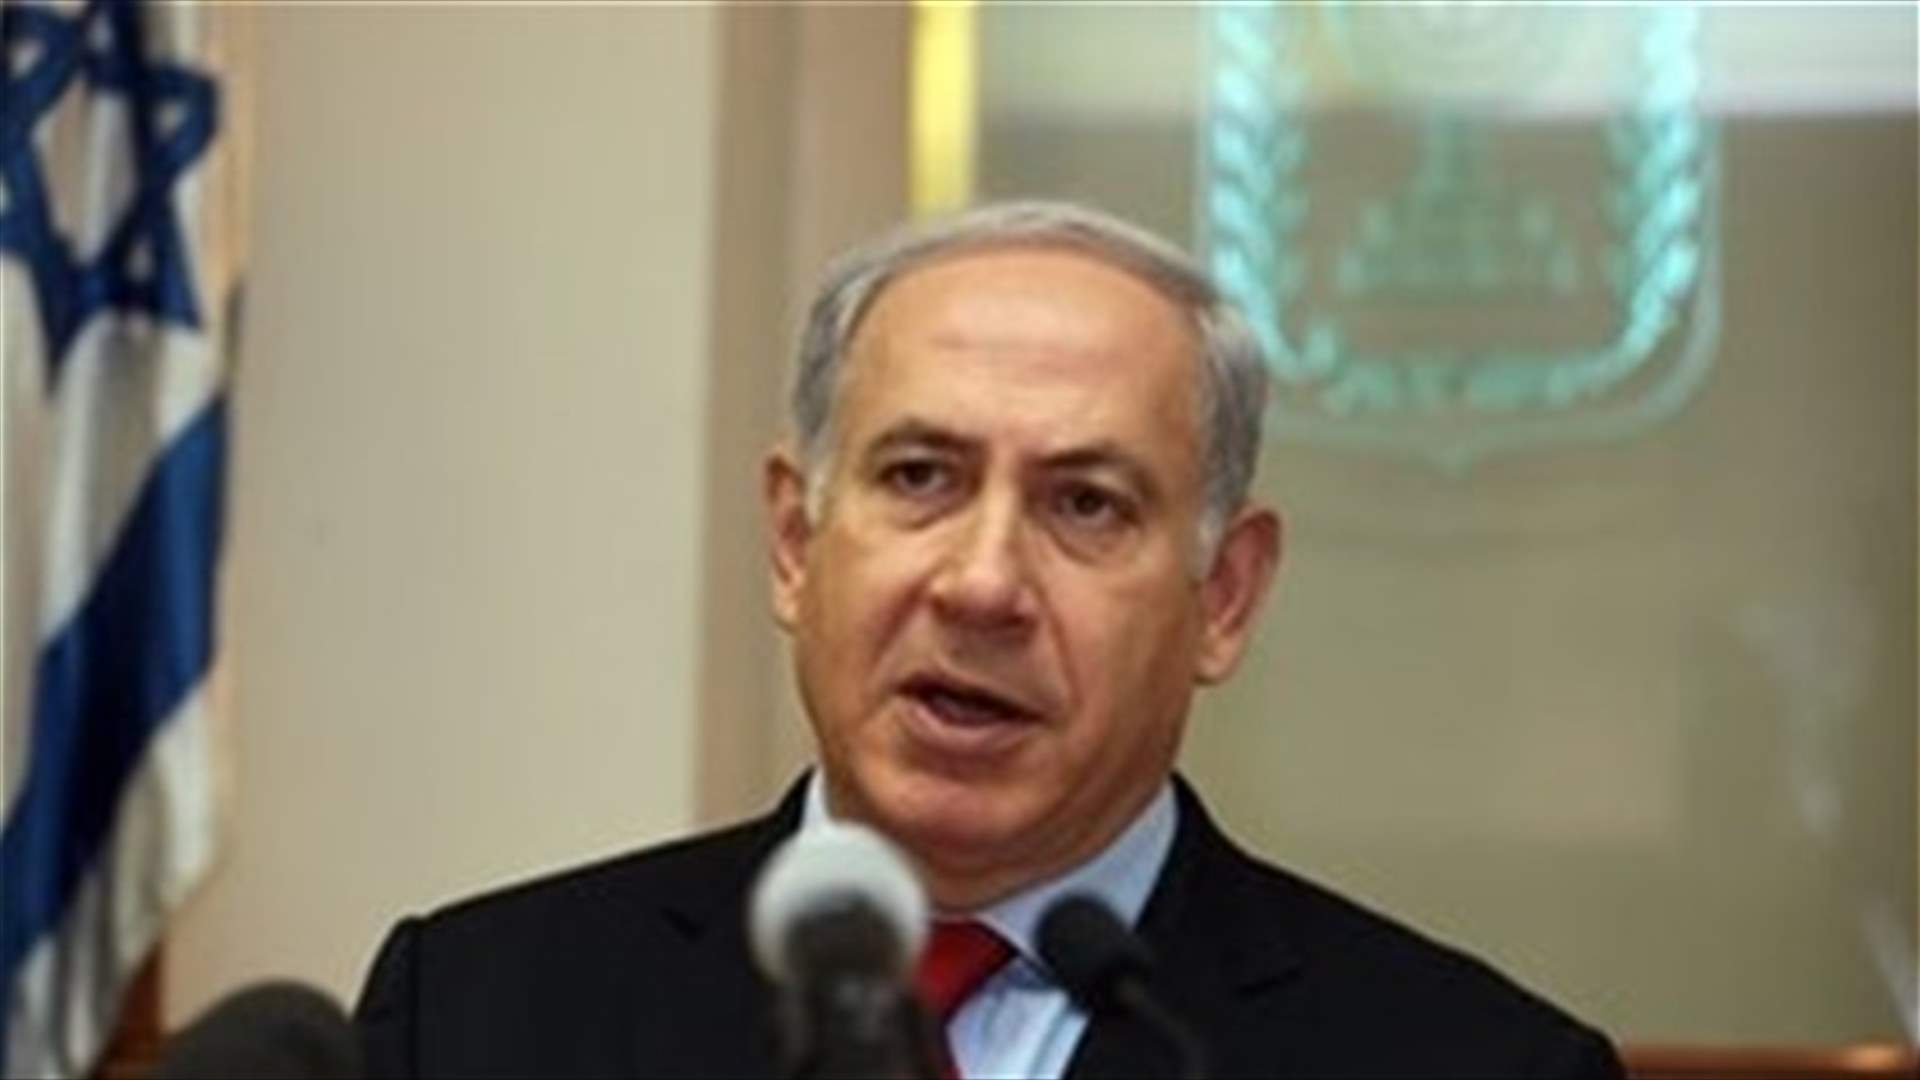 Israeli police to question Netanyahu over alleged gifts - media